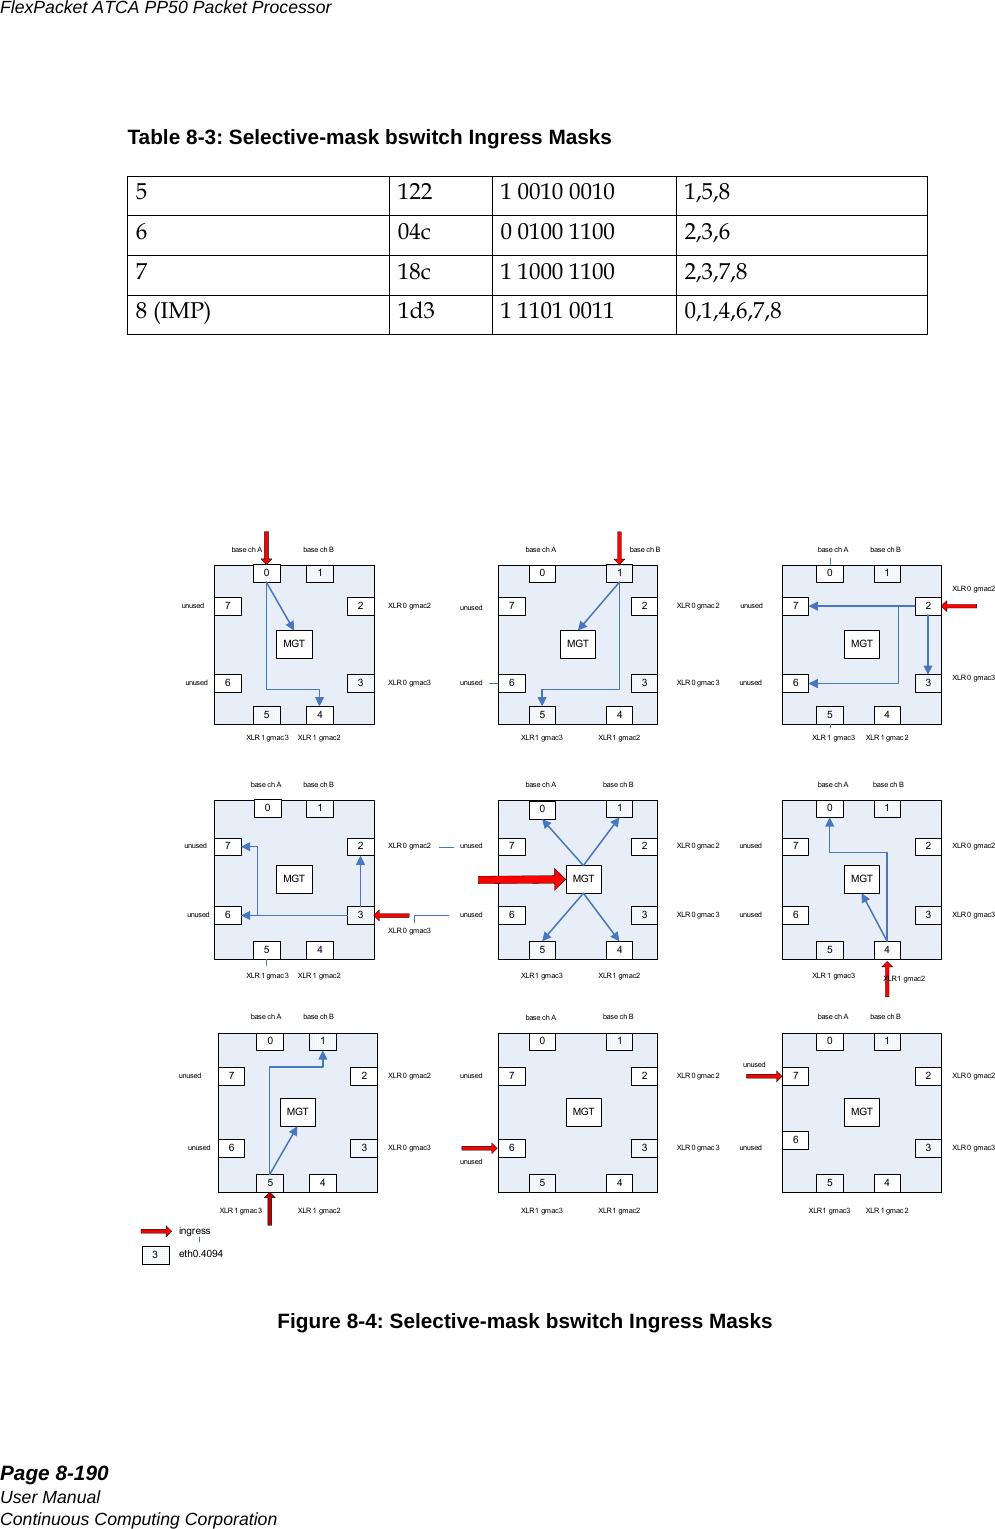 Page 8-190User ManualContinuous Computing CorporationFlexPacket ATCA PP50 Packet Processor     PreliminaryFigure 8-4: Selective-mask bswitch Ingress Masks5 122 1 0010 0010 1,5,86 04c 0 0100 1100 2,3,67 18c 1 1000 1100 2,3,7,88 (IMP) 1d3 1 1101 0011 0,1,4,6,7,8Table 8-3: Selective-mask bswitch Ingress MasksMGT01652743MGT0 1652743MGT0 1652743MGT01652743MGT0 1652743MGT0 1652743MGT0 1652743MGT01652743MGT0 1652743base ch A base ch BXLR 0 gmac2XLR 0 gmac3XLR 1 gmac2XLR 1 gmac 3unusedunusedbase ch B base ch Bbase ch B base ch B base ch Bbase ch B base ch B base ch Bbase ch A base ch Abase ch A base ch A base ch Abase ch A base ch A base ch AXLR 0 gmac 2XLR 0 gmac2XLR 0 gmac2 XLR 0 gmac 2 XLR 0 gmac2XLR 0 gmac2 XLR 0 gmac 2 XLR 0 gmac2XLR 0 gmac 3 XLR 0 gmac3XLR 0 gmac3XLR 0 gmac 3 XLR 0 gmac3XLR 0 gmac3XLR 0 gmac 3XLR 0 gmac3XLR1 gmac2 XLR 1 gm ac 2XLR 1 gmac2 XLR1 gmac2 XLR 1 gmac2XLR 1 gmac2 XLR1 gmac2 XLR 1 gm ac 2XLR1 gm ac3 XLR 1 gm ac 3XLR1 gm ac3 XLR 1 gm ac 3XLR 1 gmac 3XLR1 gm ac3XLR 1 gmac 3 XLR1 gmac3unused unusedunused unused unusedunused unusedunusedunused unusedunused unused unusedunusedunusedunused3ingresseth0.4094